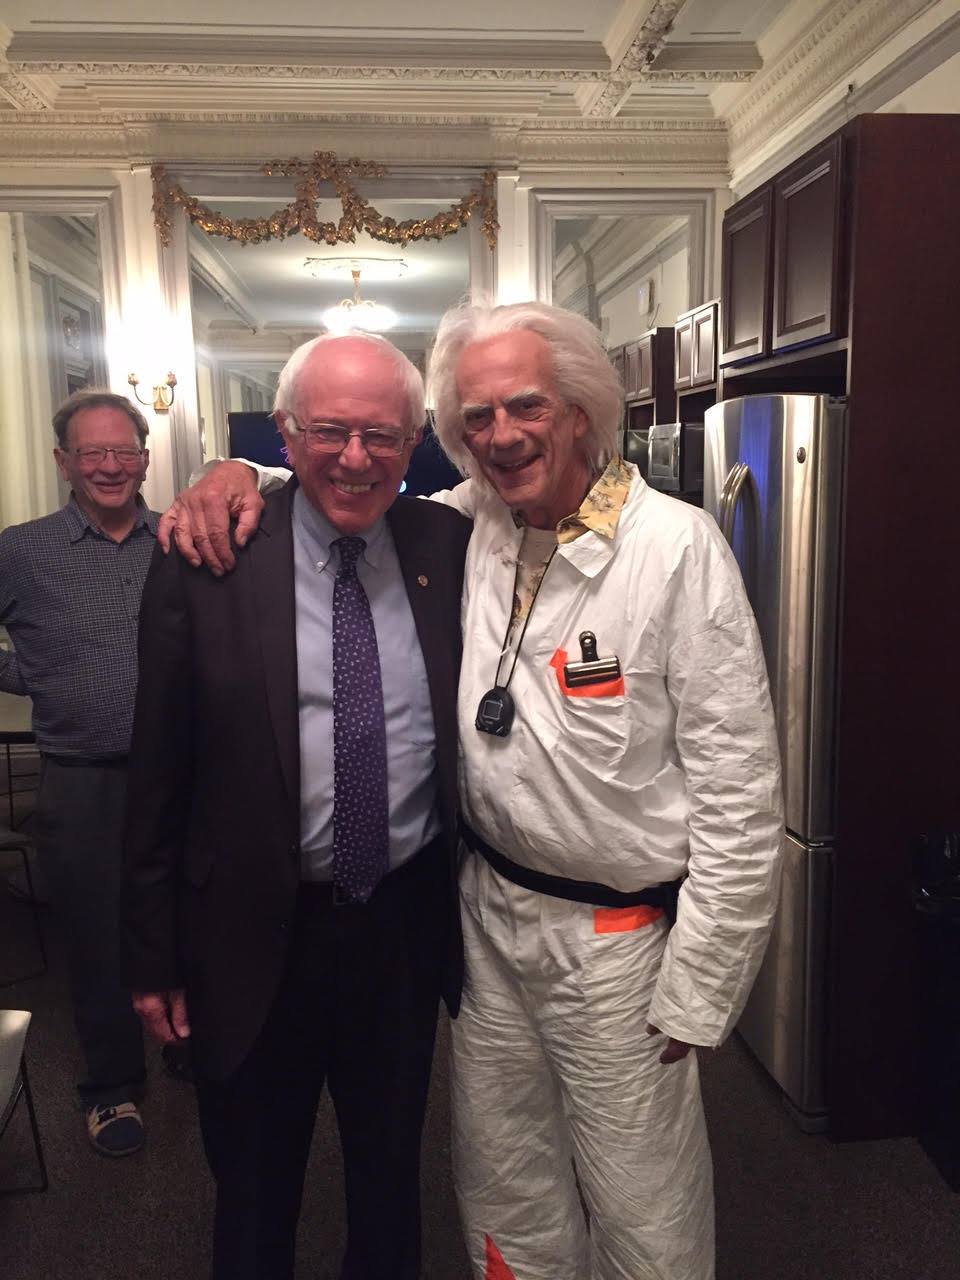 Bernie Sanders with Christopher Lloyd, "Doc Watson" from Back to the Future on Oct. 21, 2015.